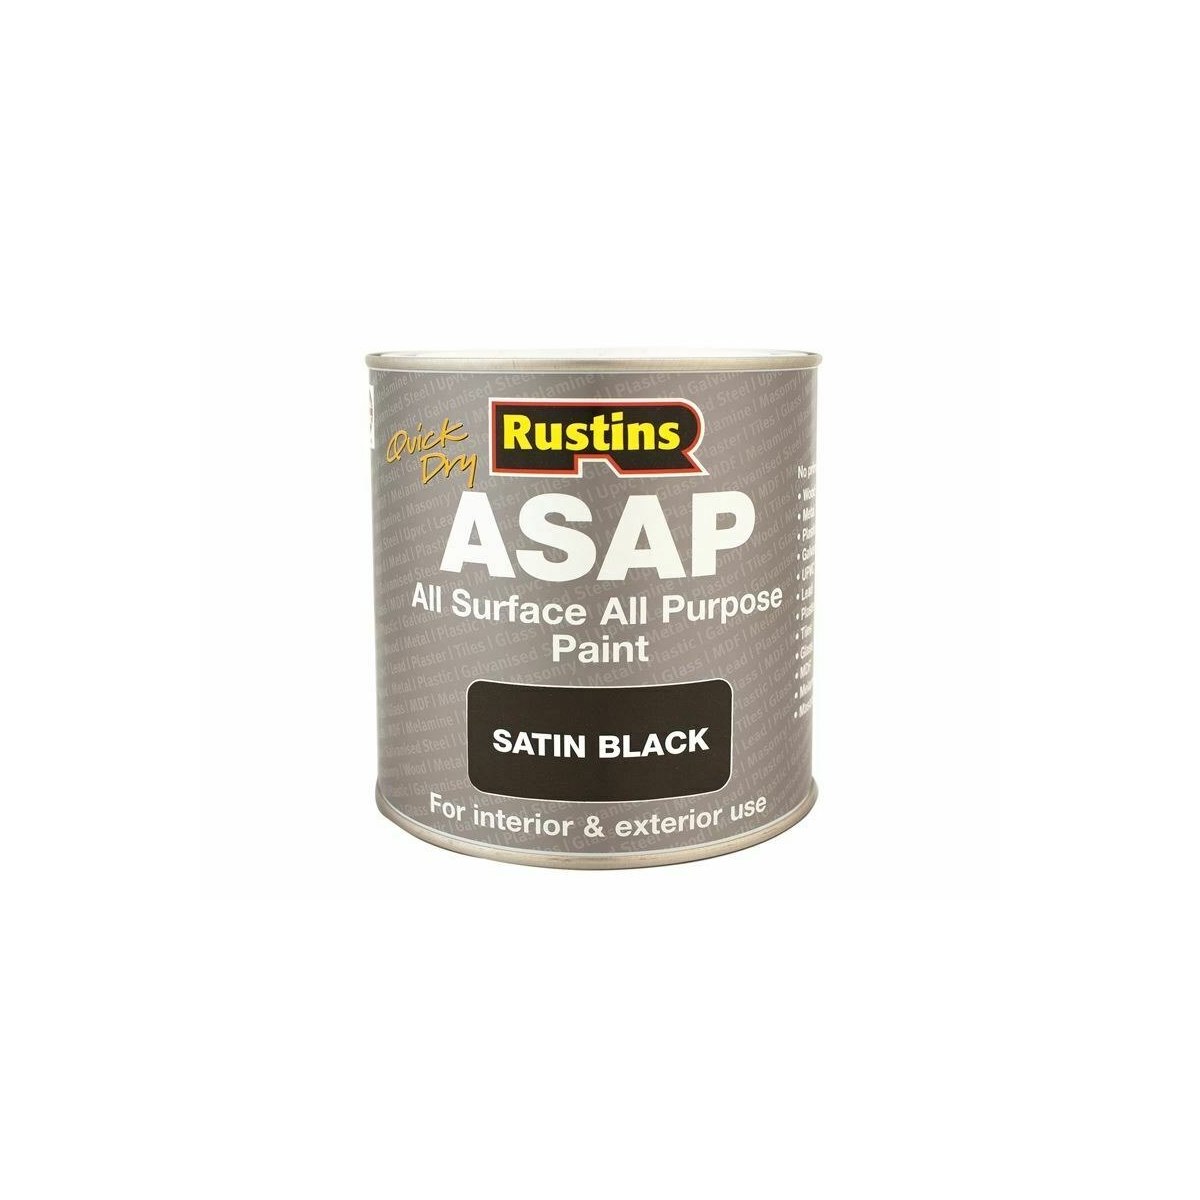 Rustins Quick Dry All Surface All Purpose Paint (ASAP) Black 500ml